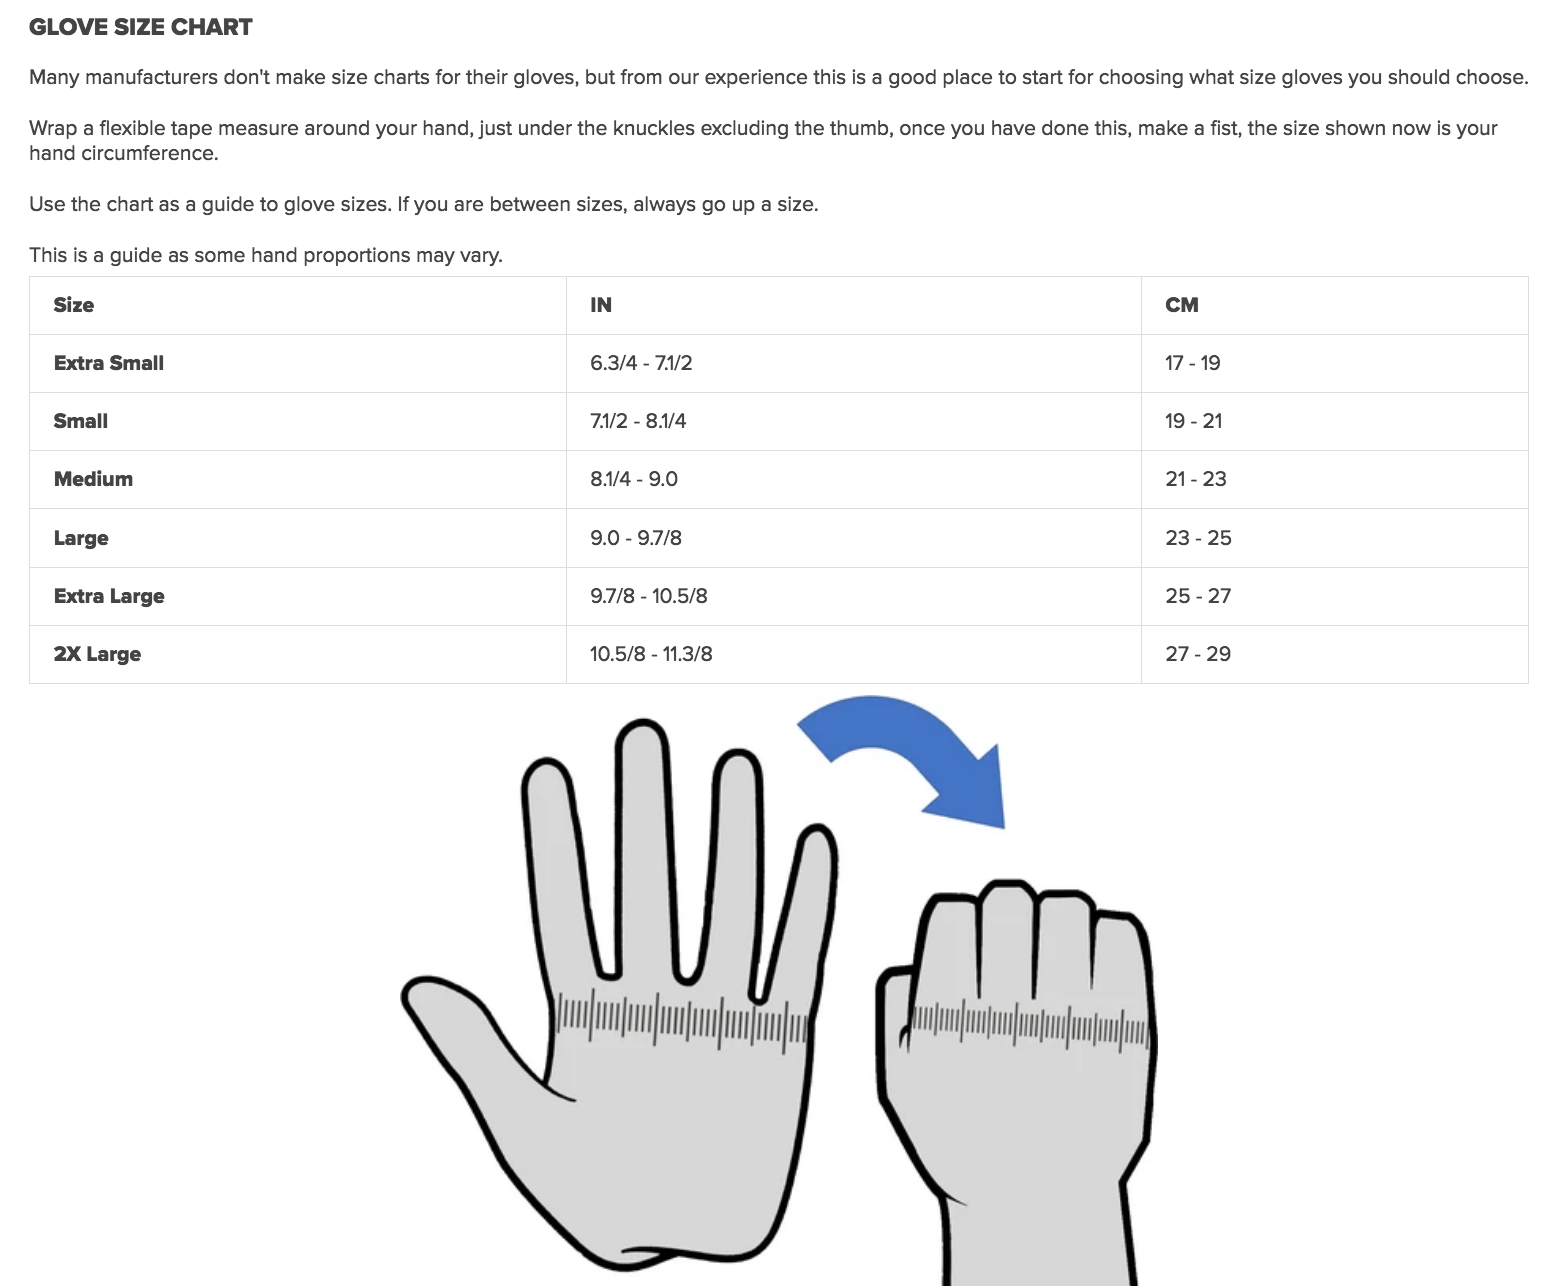 Male Size Chart for 5MM G1 5 Finger Glove - Size M